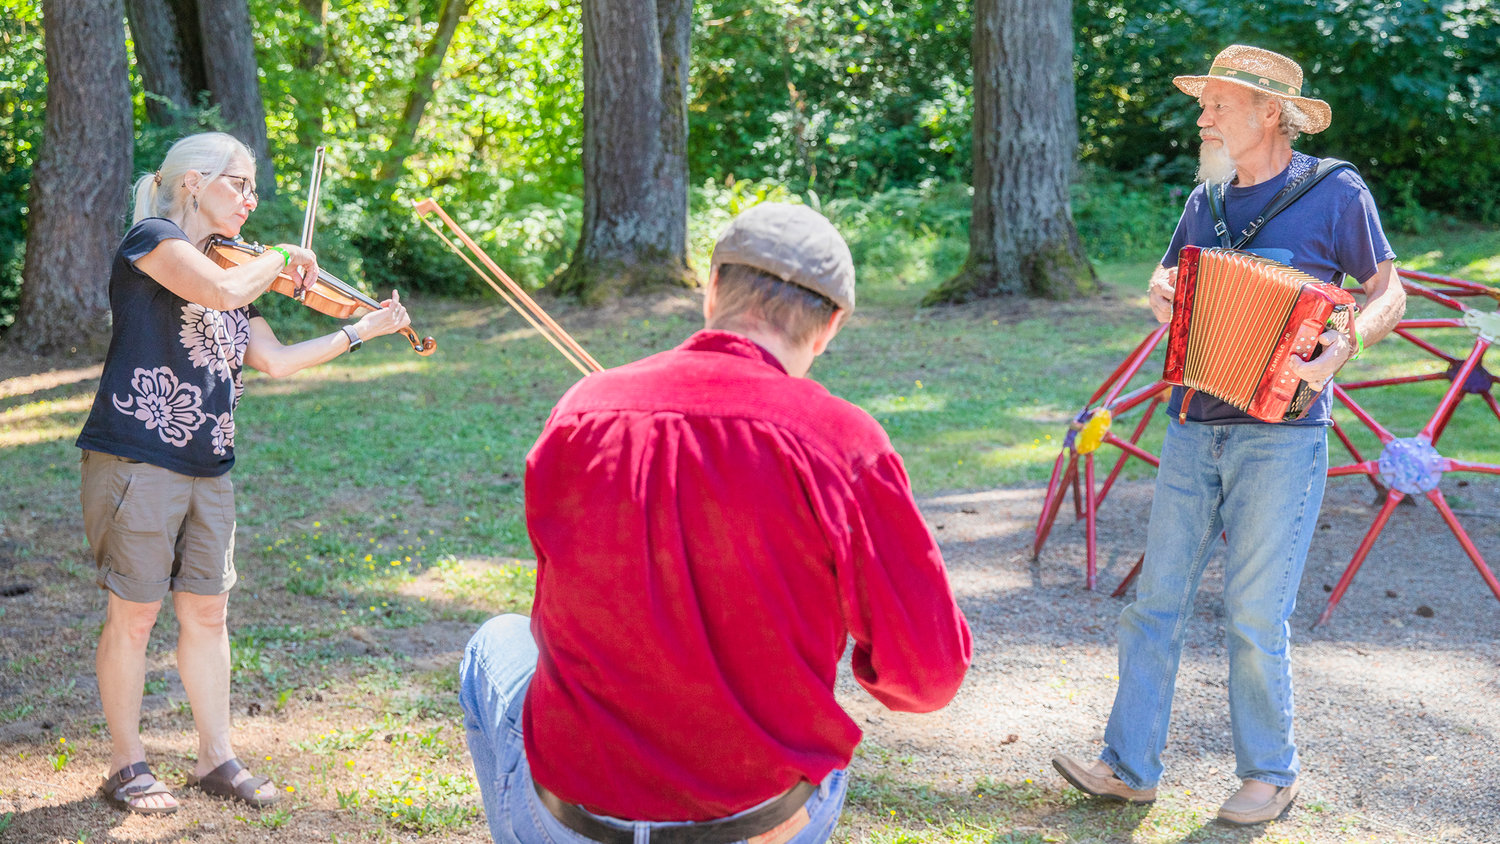 From left, Amy Bury, Steve Cox and Geoff Bury play instruments at Winolequa Memorial Park in Winlock Saturday morning.